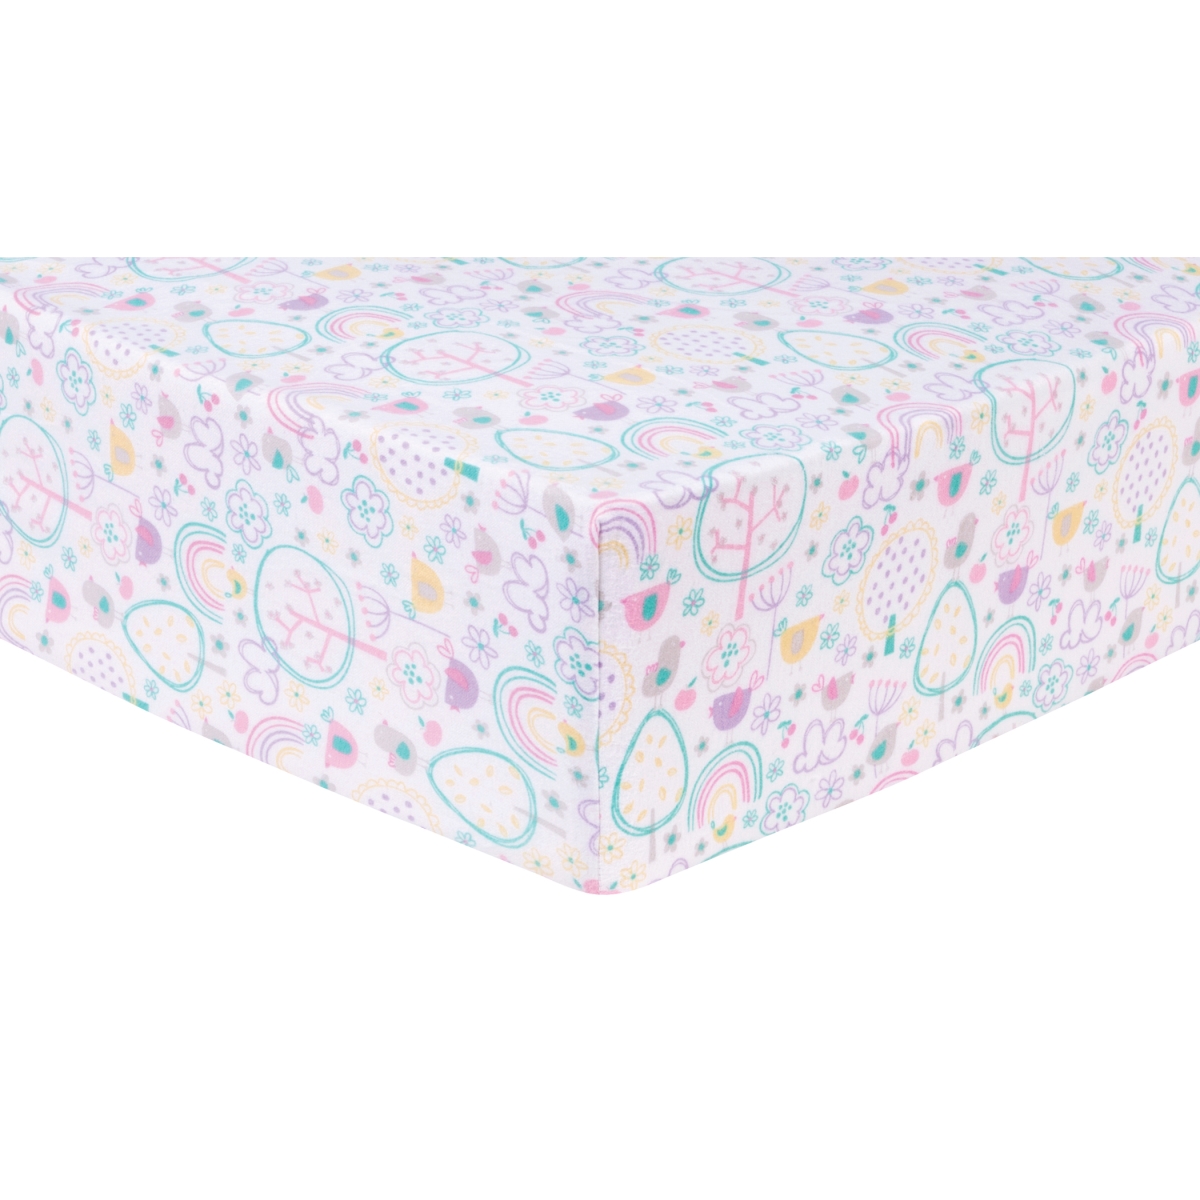 103264 28 X 52 In. Rainbow Birds Deluxe Flannel Fitted Crib Sheet - Assorted Color